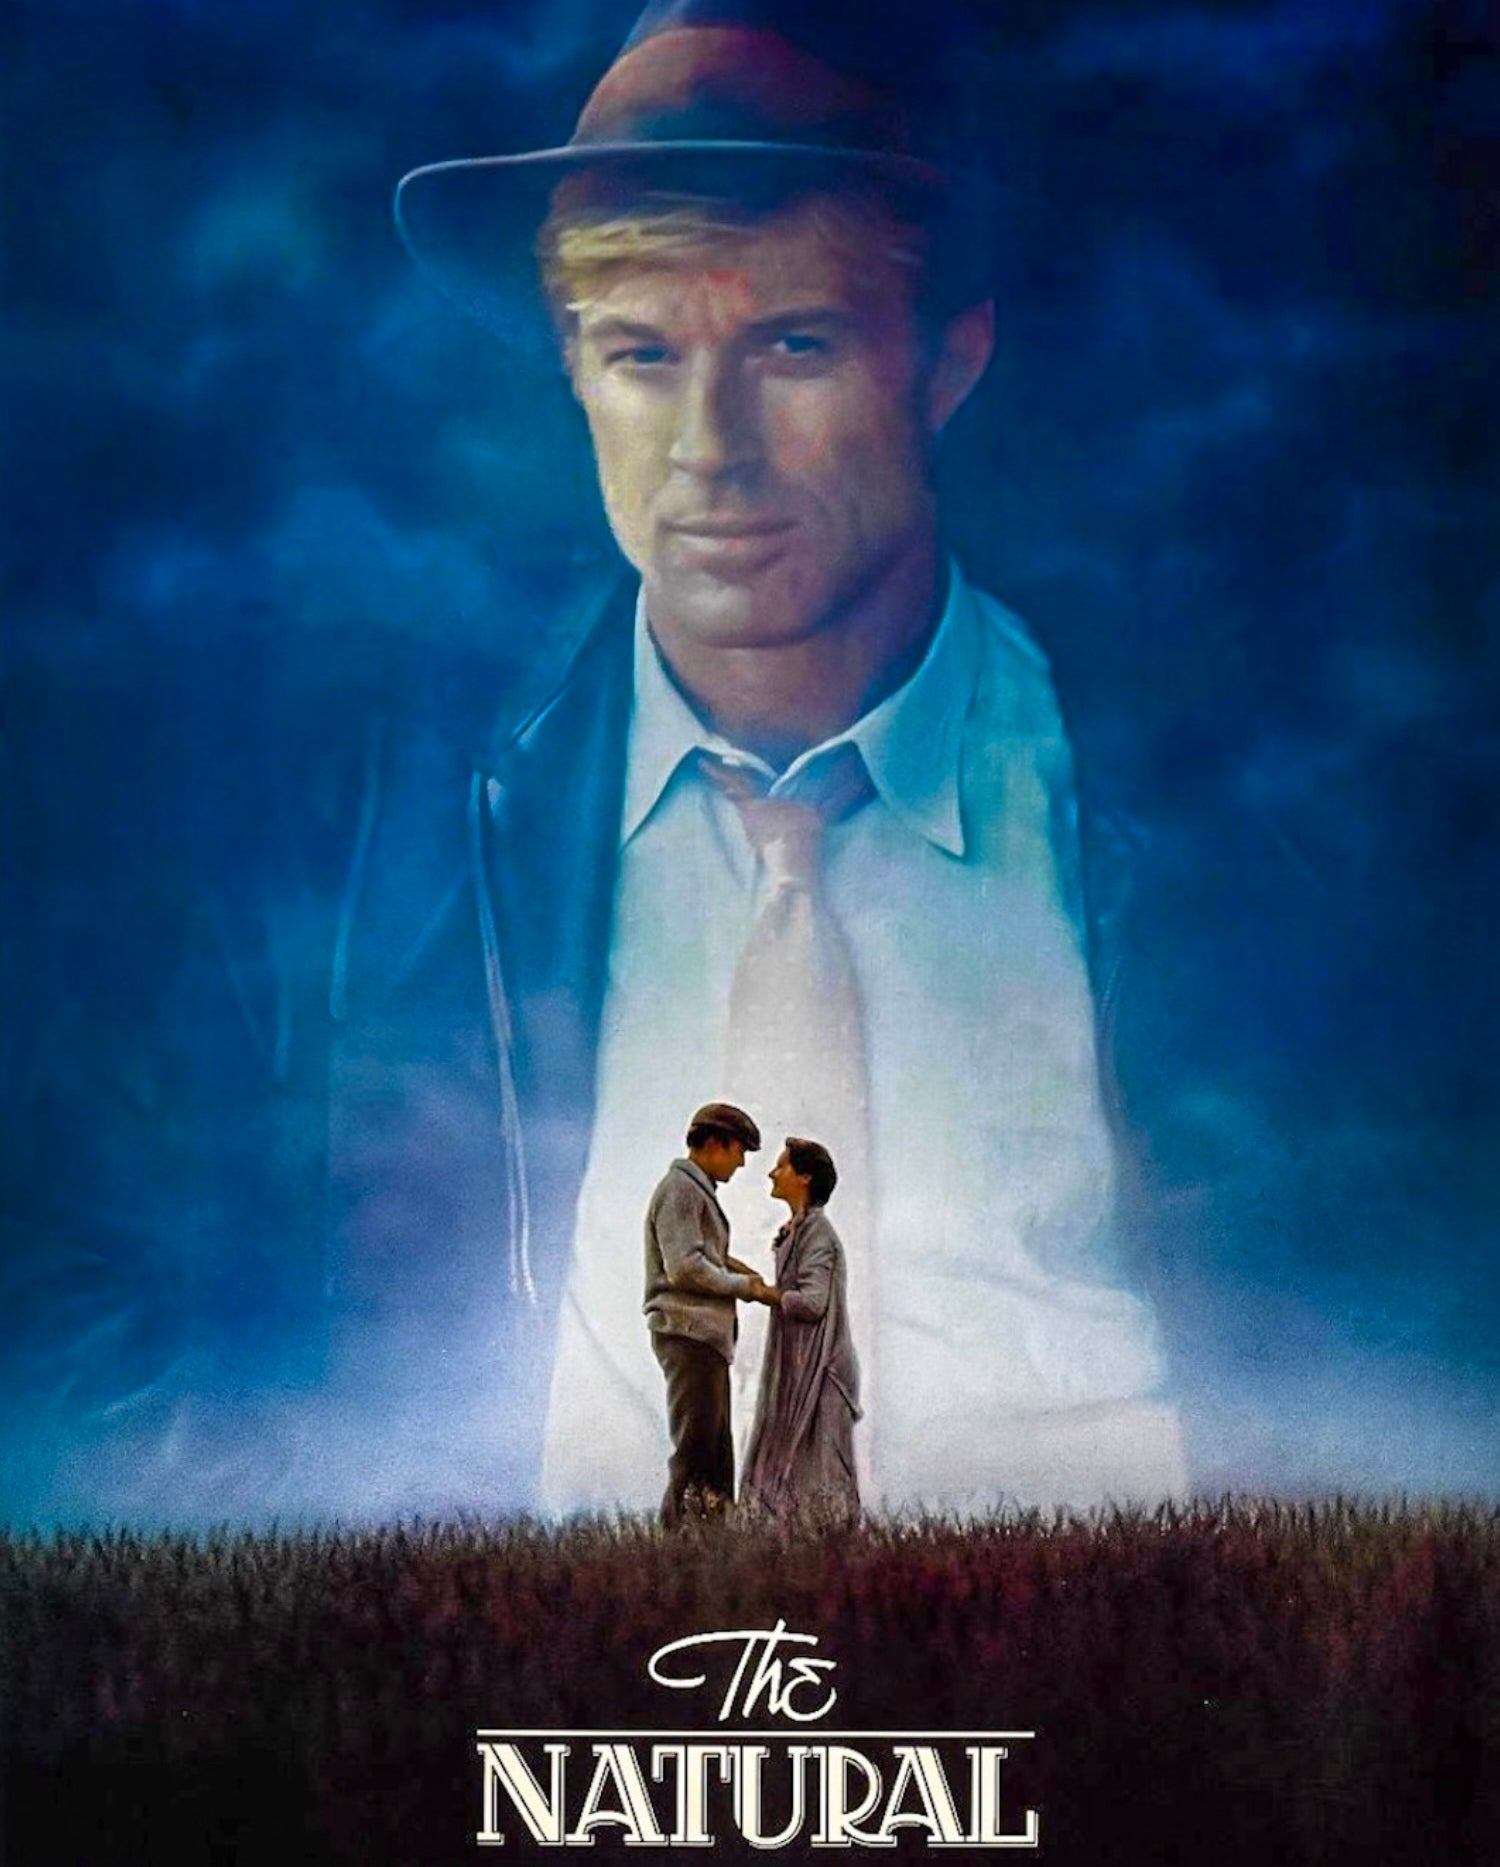 Movie poster of &quot;The Natural&quot; featuring Robert Redford as Roy Hobbs in a suit and hat with a ghostly couple below